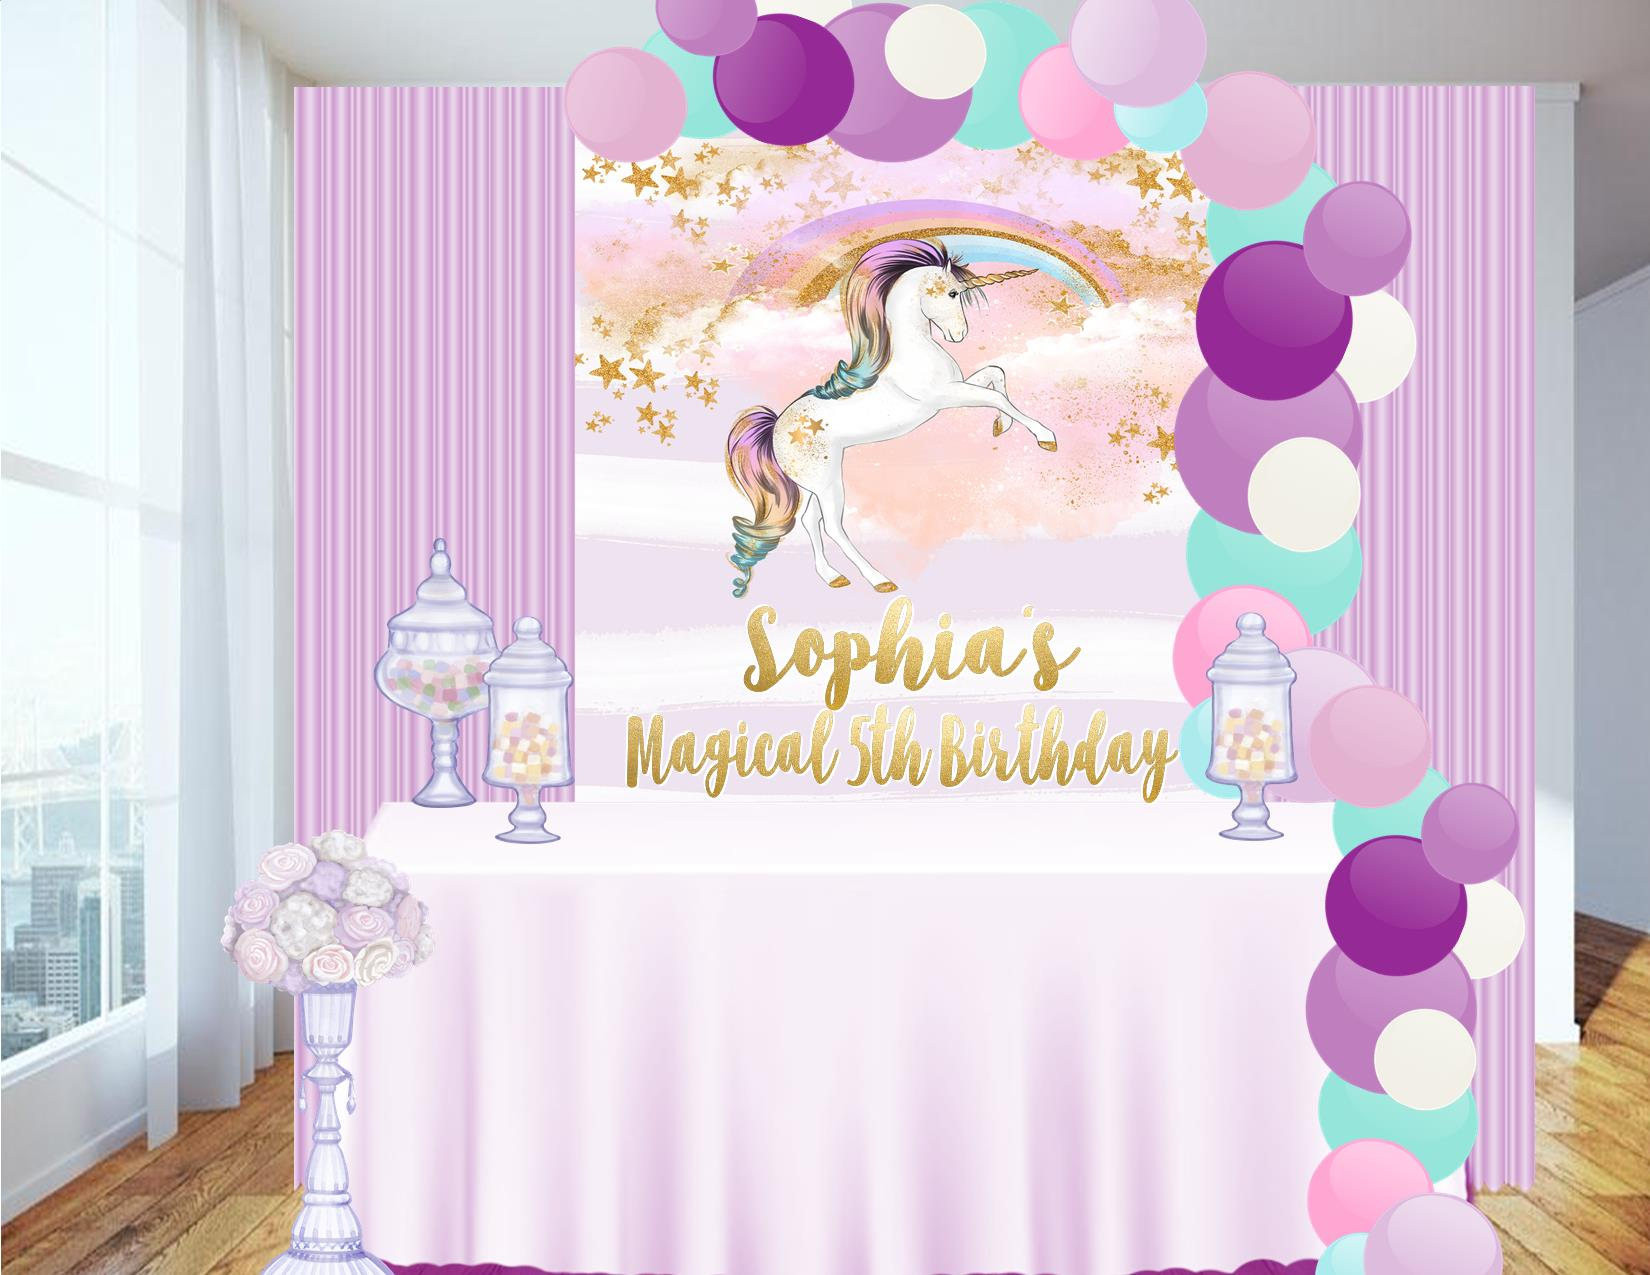 Unicorn Party Table Ideas
 DIGITAL FILE Candy Table Backdrop Unicorn Party Unicorn